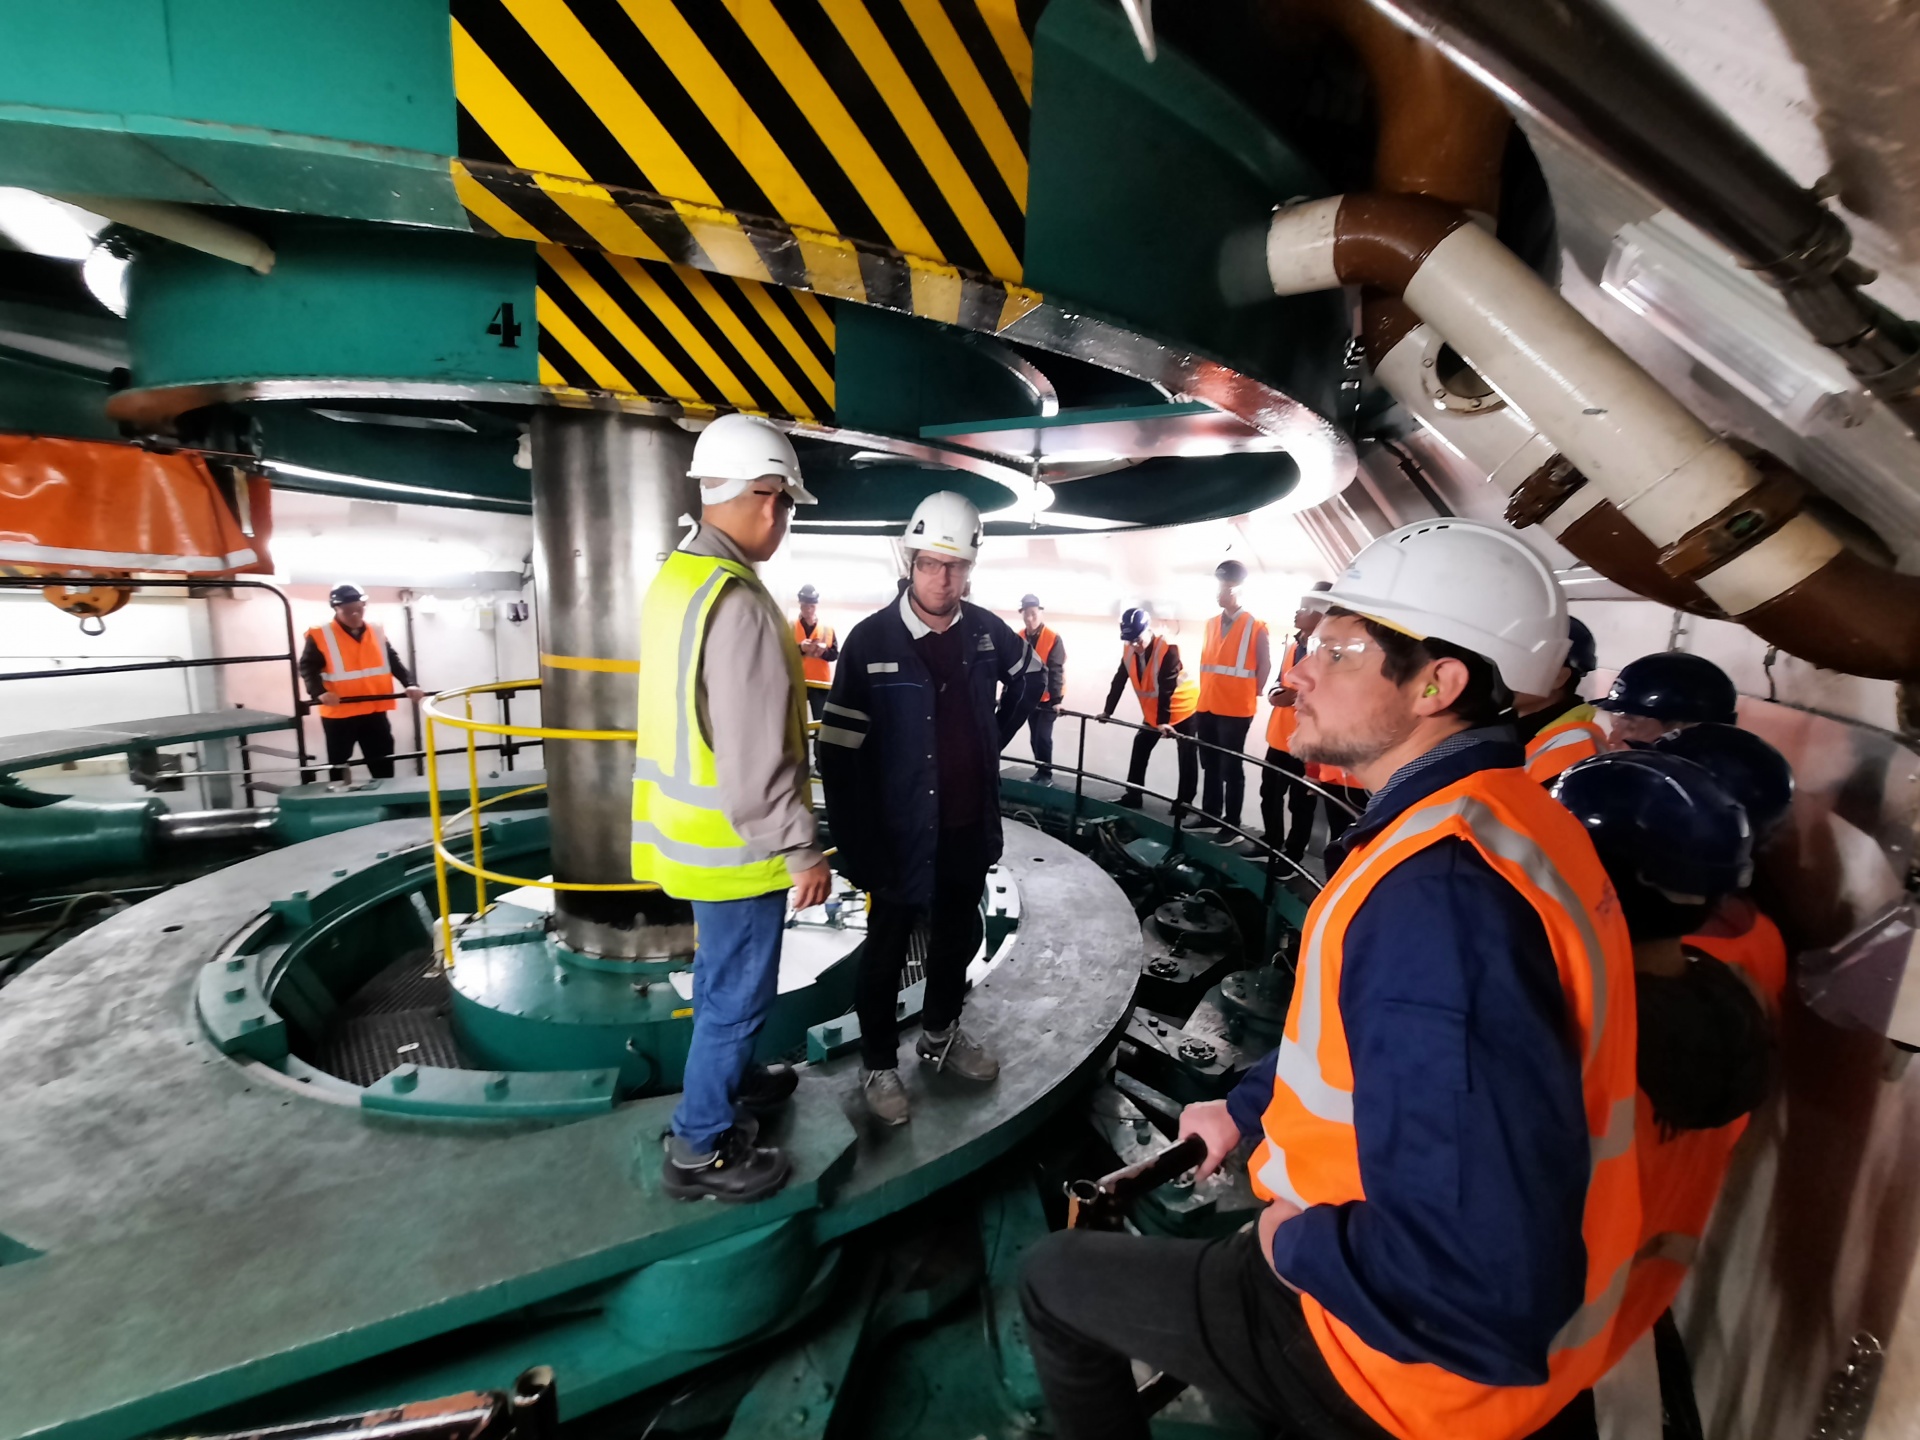 EVN delegation explores leading HSE practices at Coo Pumped Storage Plant in Belgium